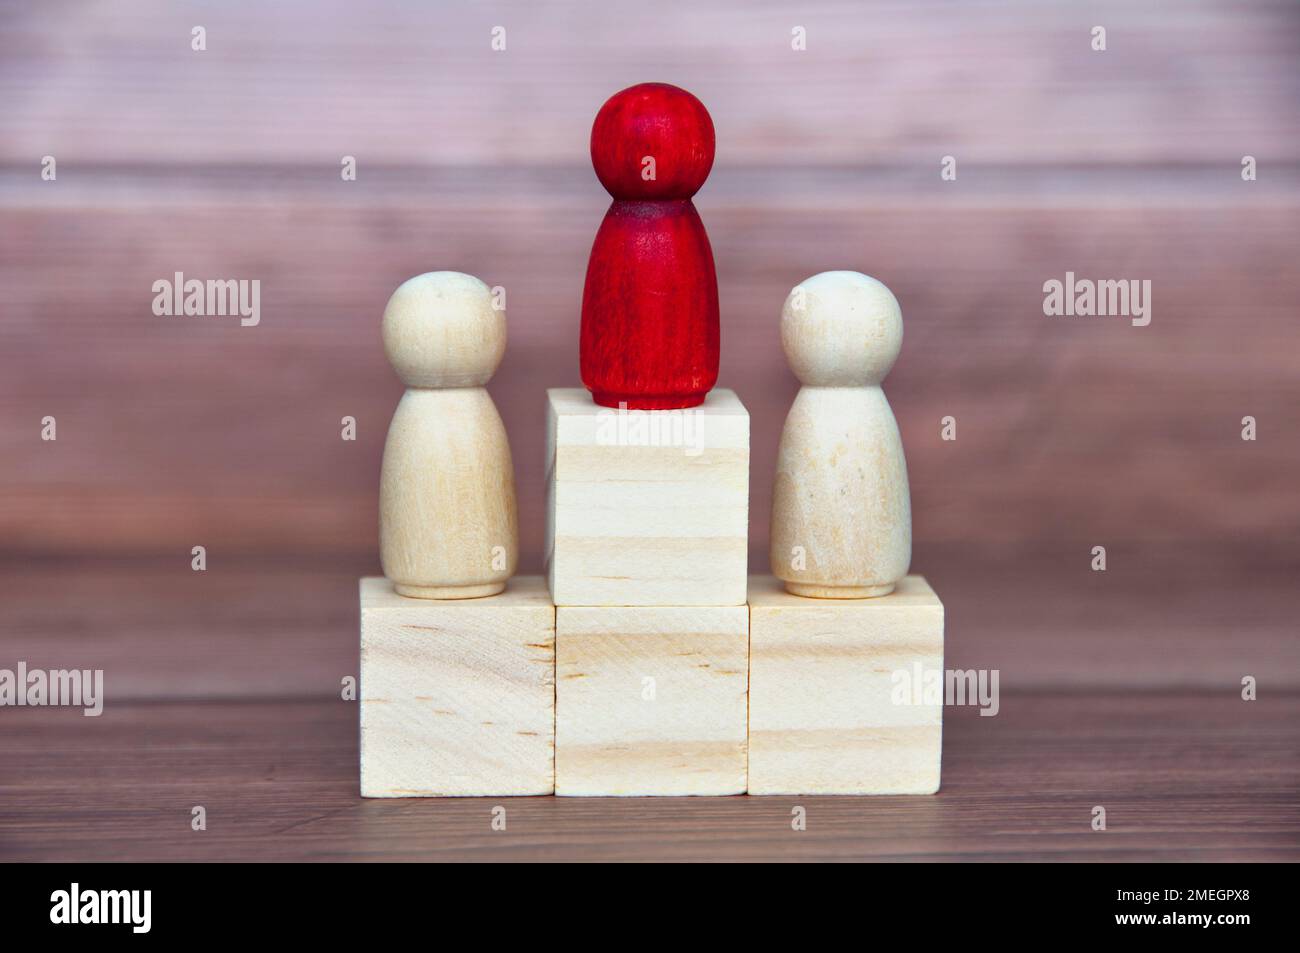 Winning concept - Red figure in the middle of other figure on wooden blocks. Stock Photo